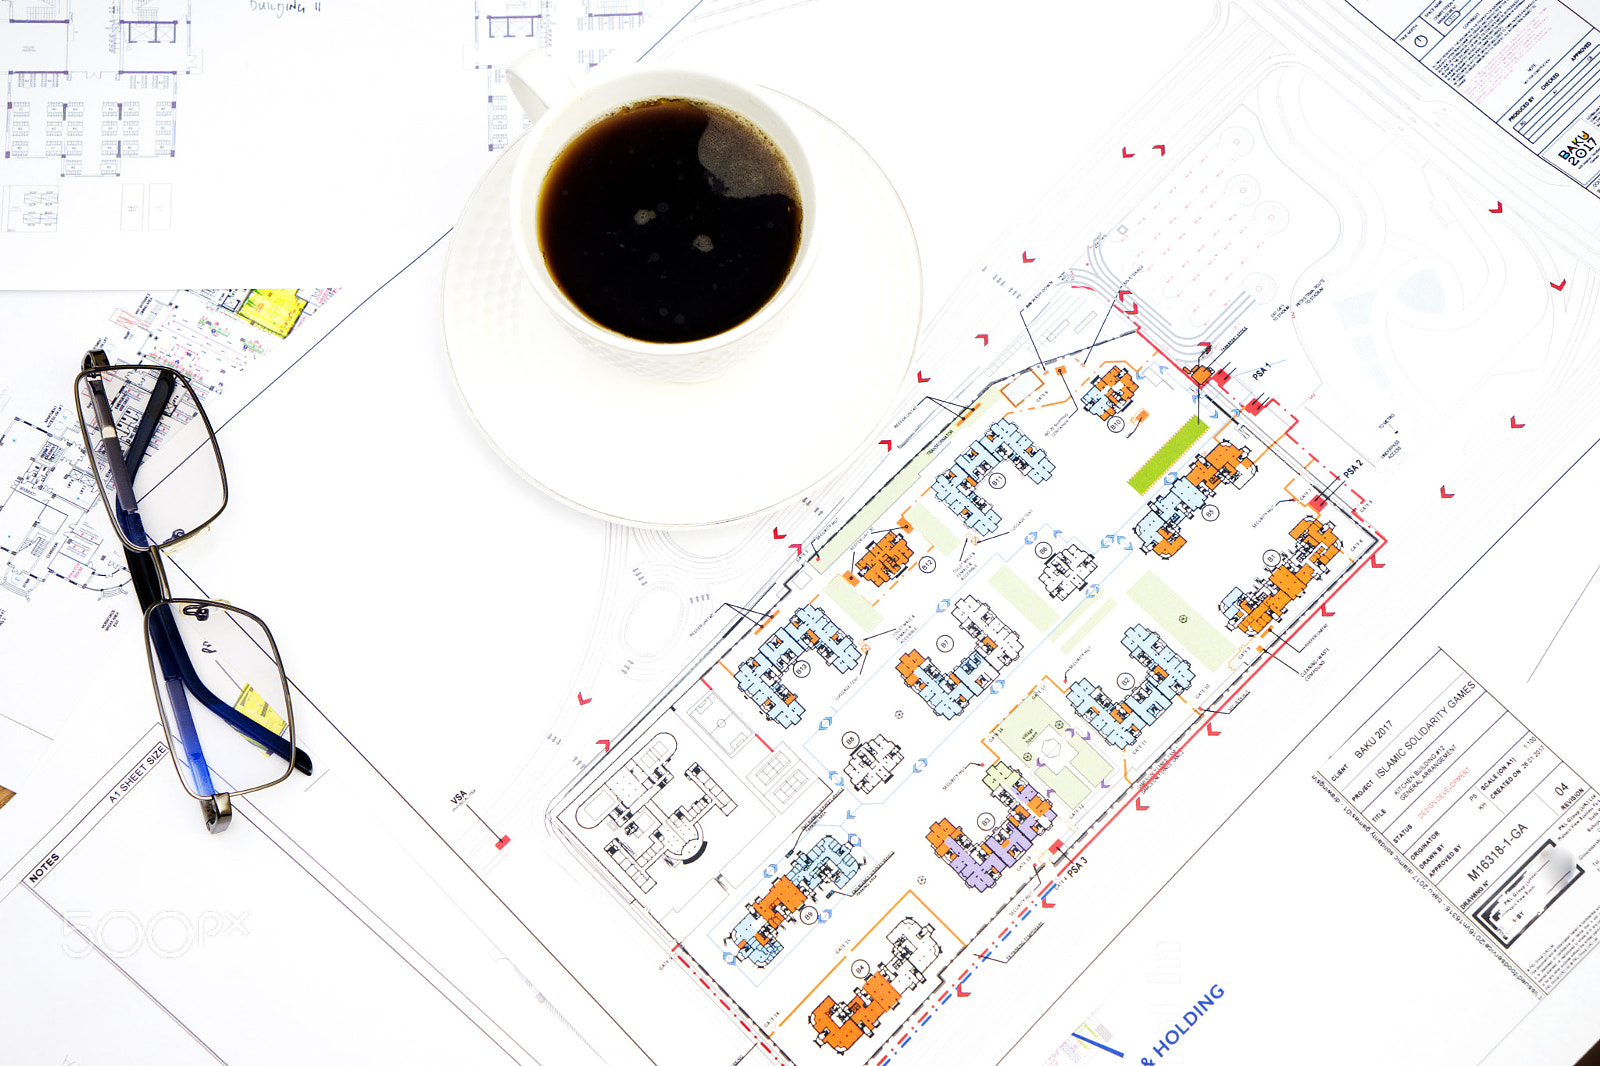 Sony a7 sample photo. Drawings, pencil ,points a cup of coffee on the table photography